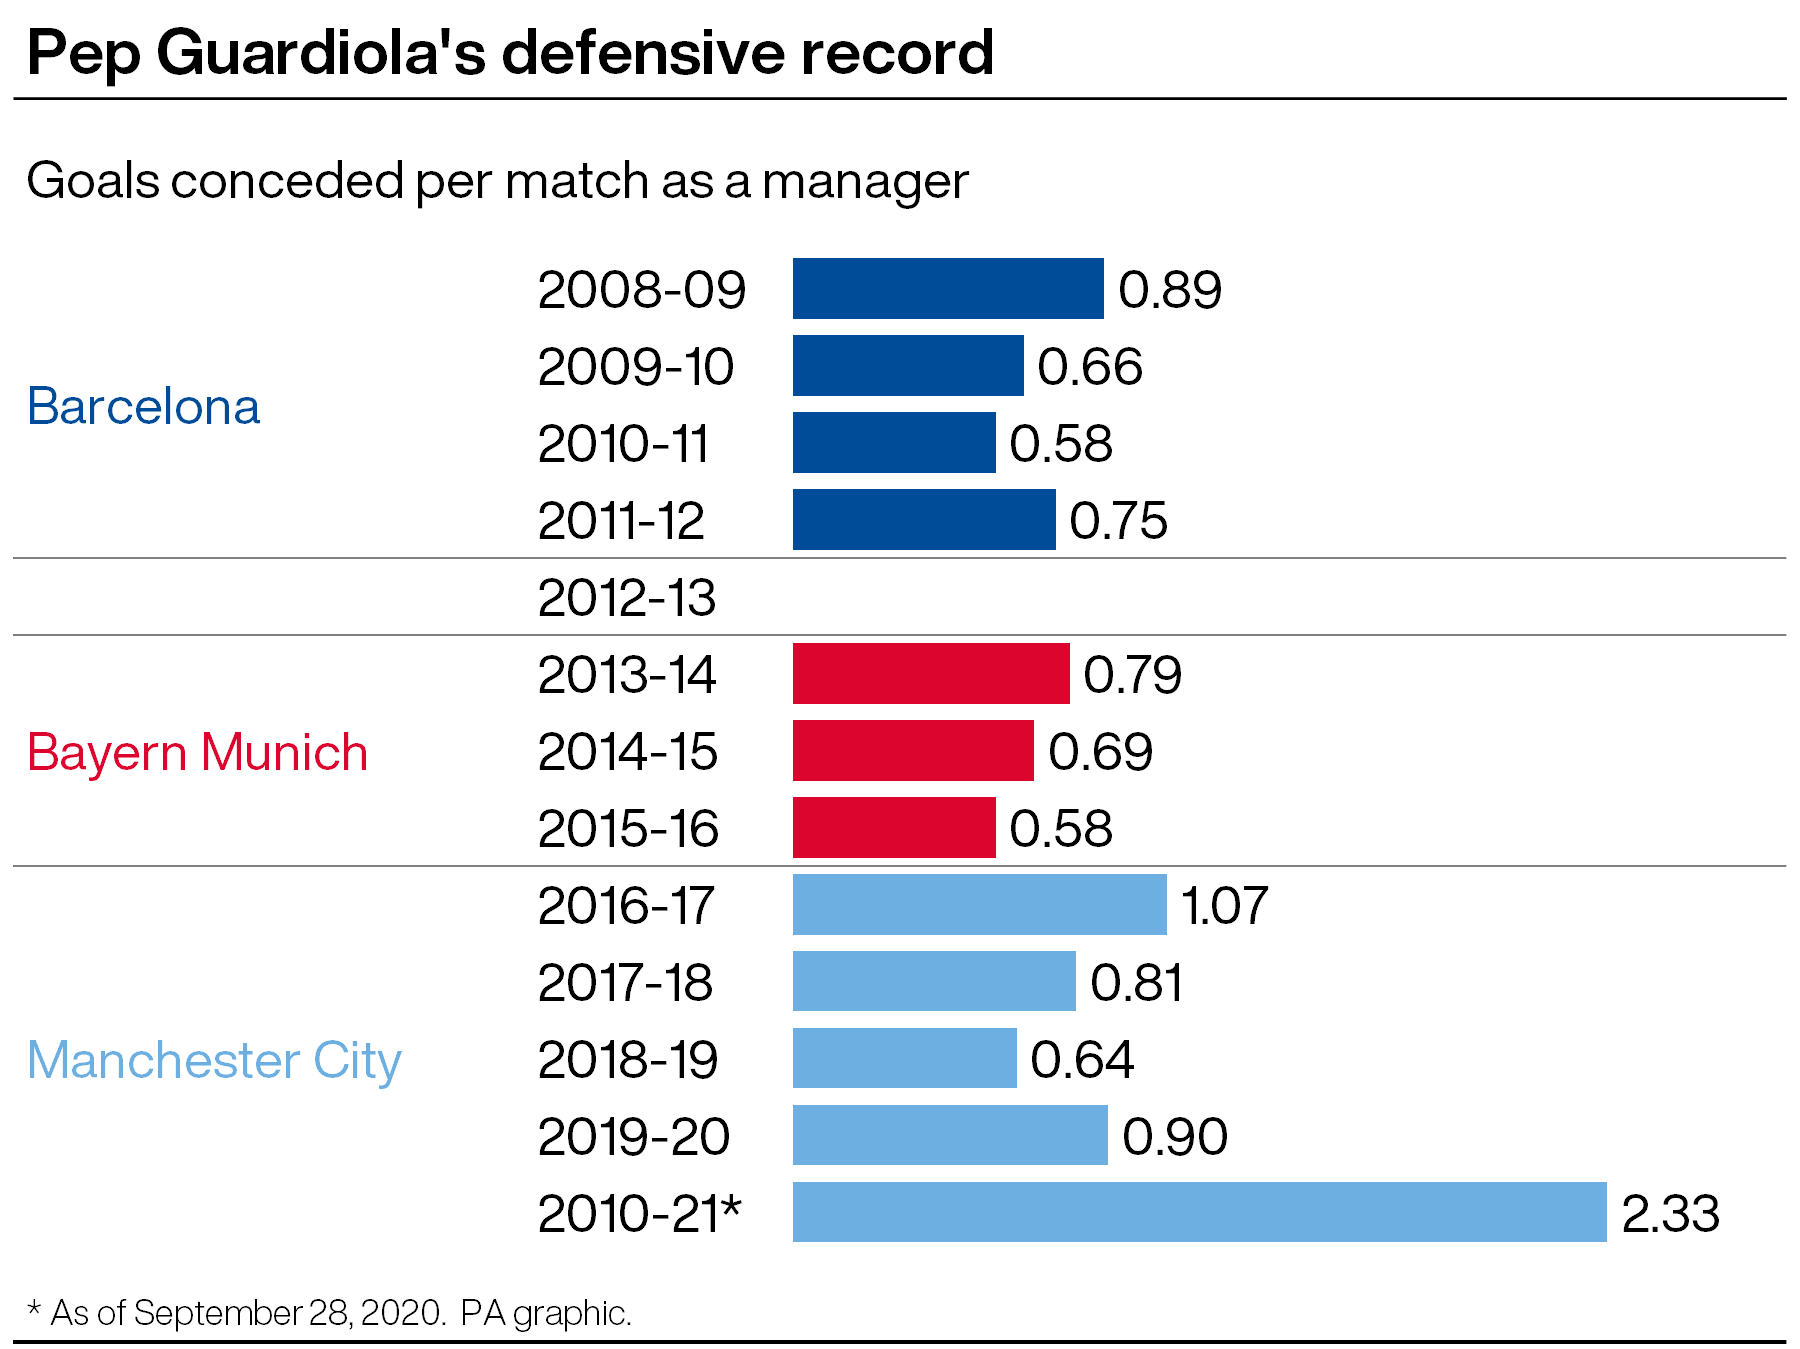 Pep Guardiola's defensive record as a manager